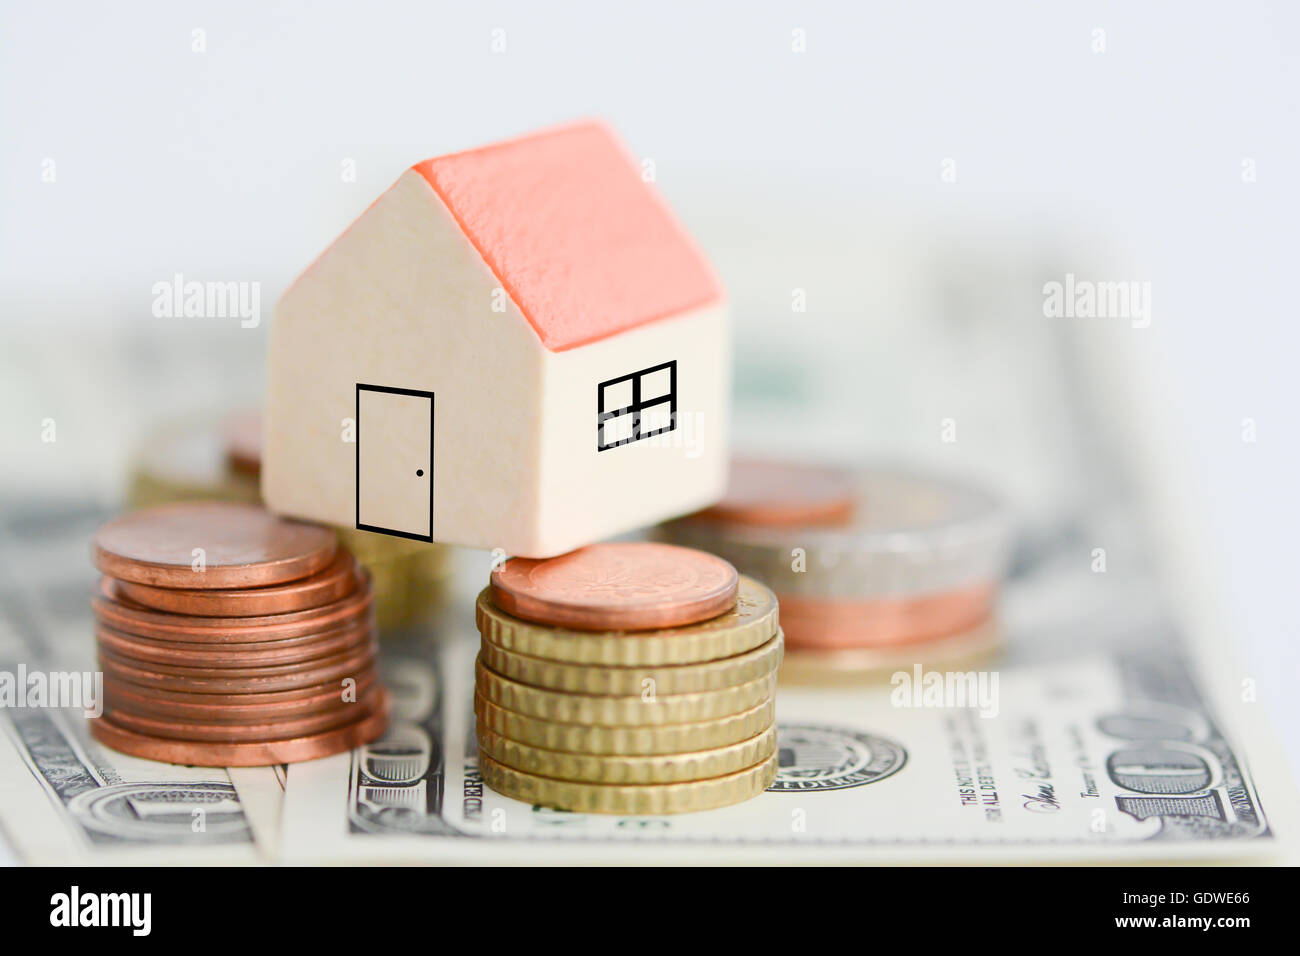 House property prices concept with money pillars from coins Stock Photo